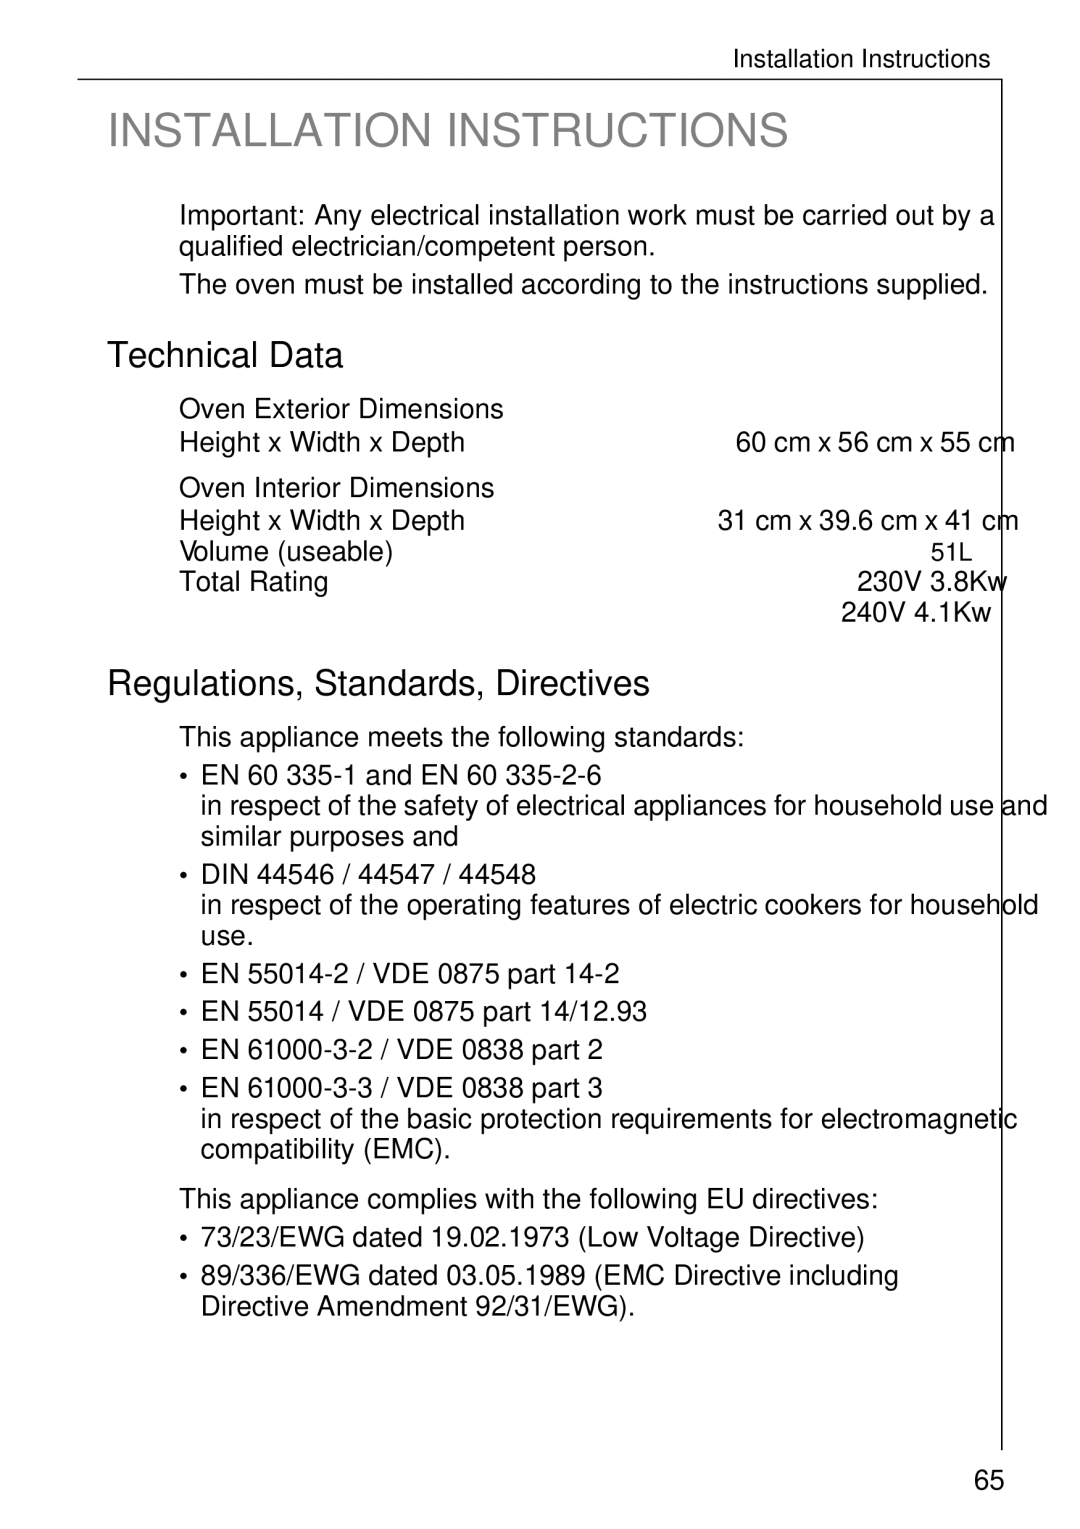 Electrolux B 81005 Technical Data, Regulations, Standards, Directives, Oven Exterior Dimensions, Oven Interior Dimensions 